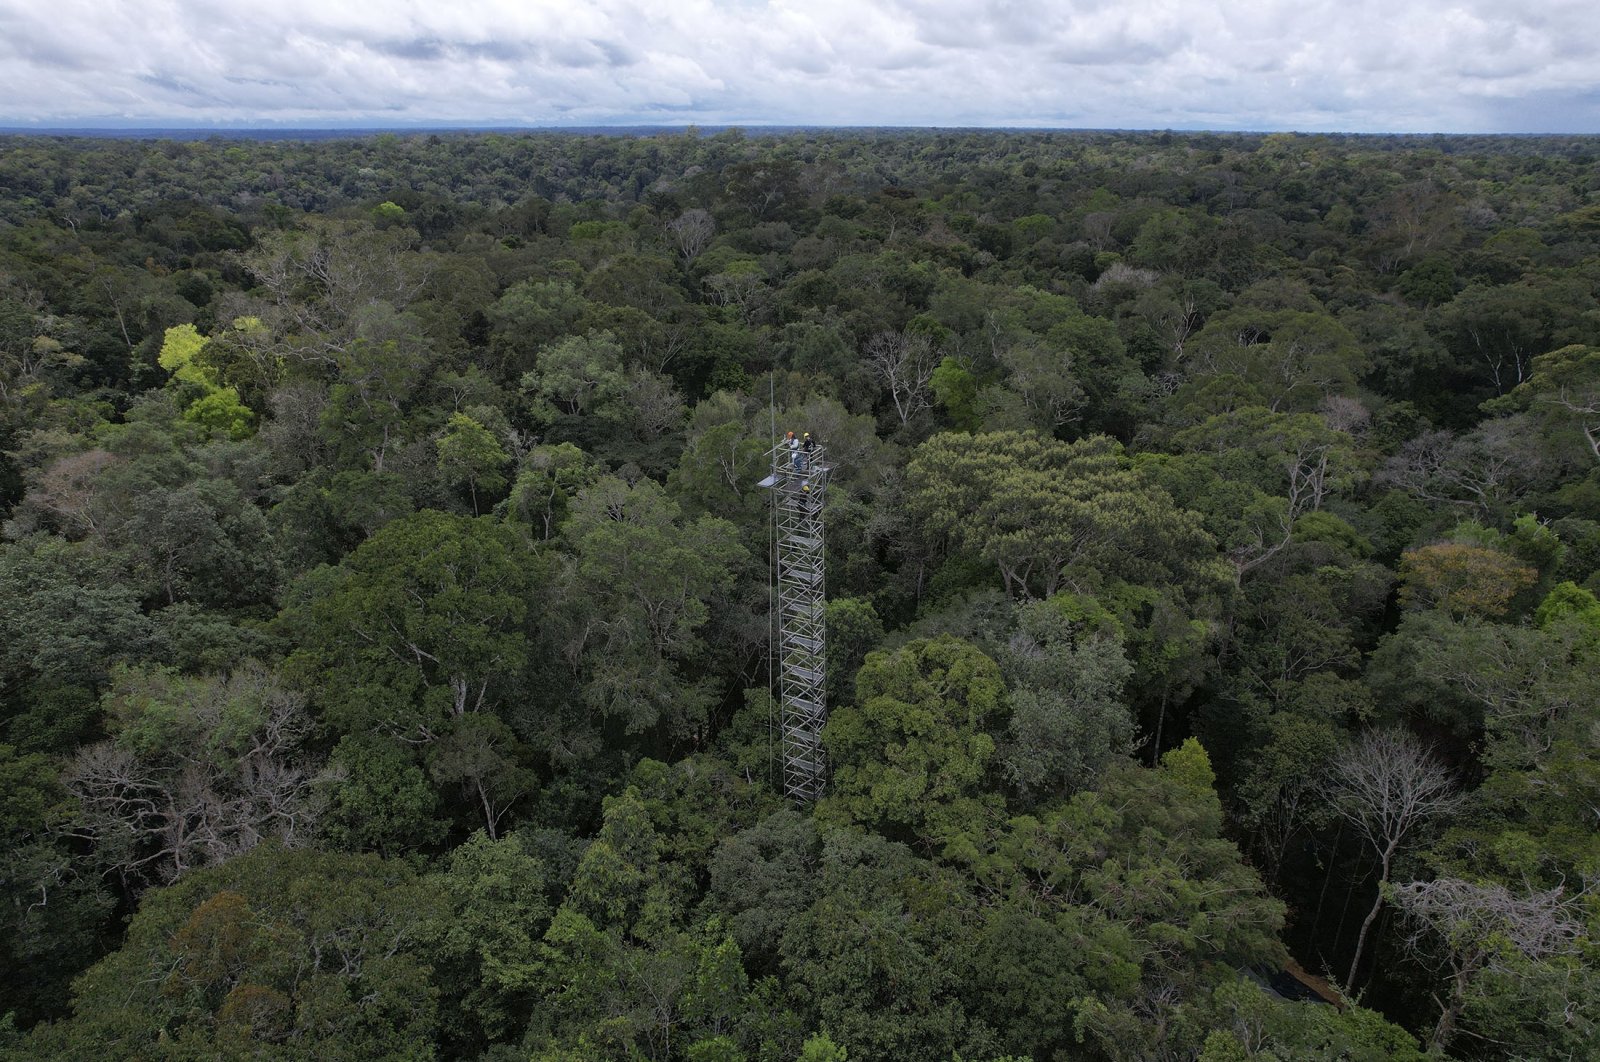 Workers survey a tower that will be part of a complex of towers arrayed in six rings to spray carbon dioxide into the rainforest north of Manaus, Brazil, May 23, 2023. (AP Photo)